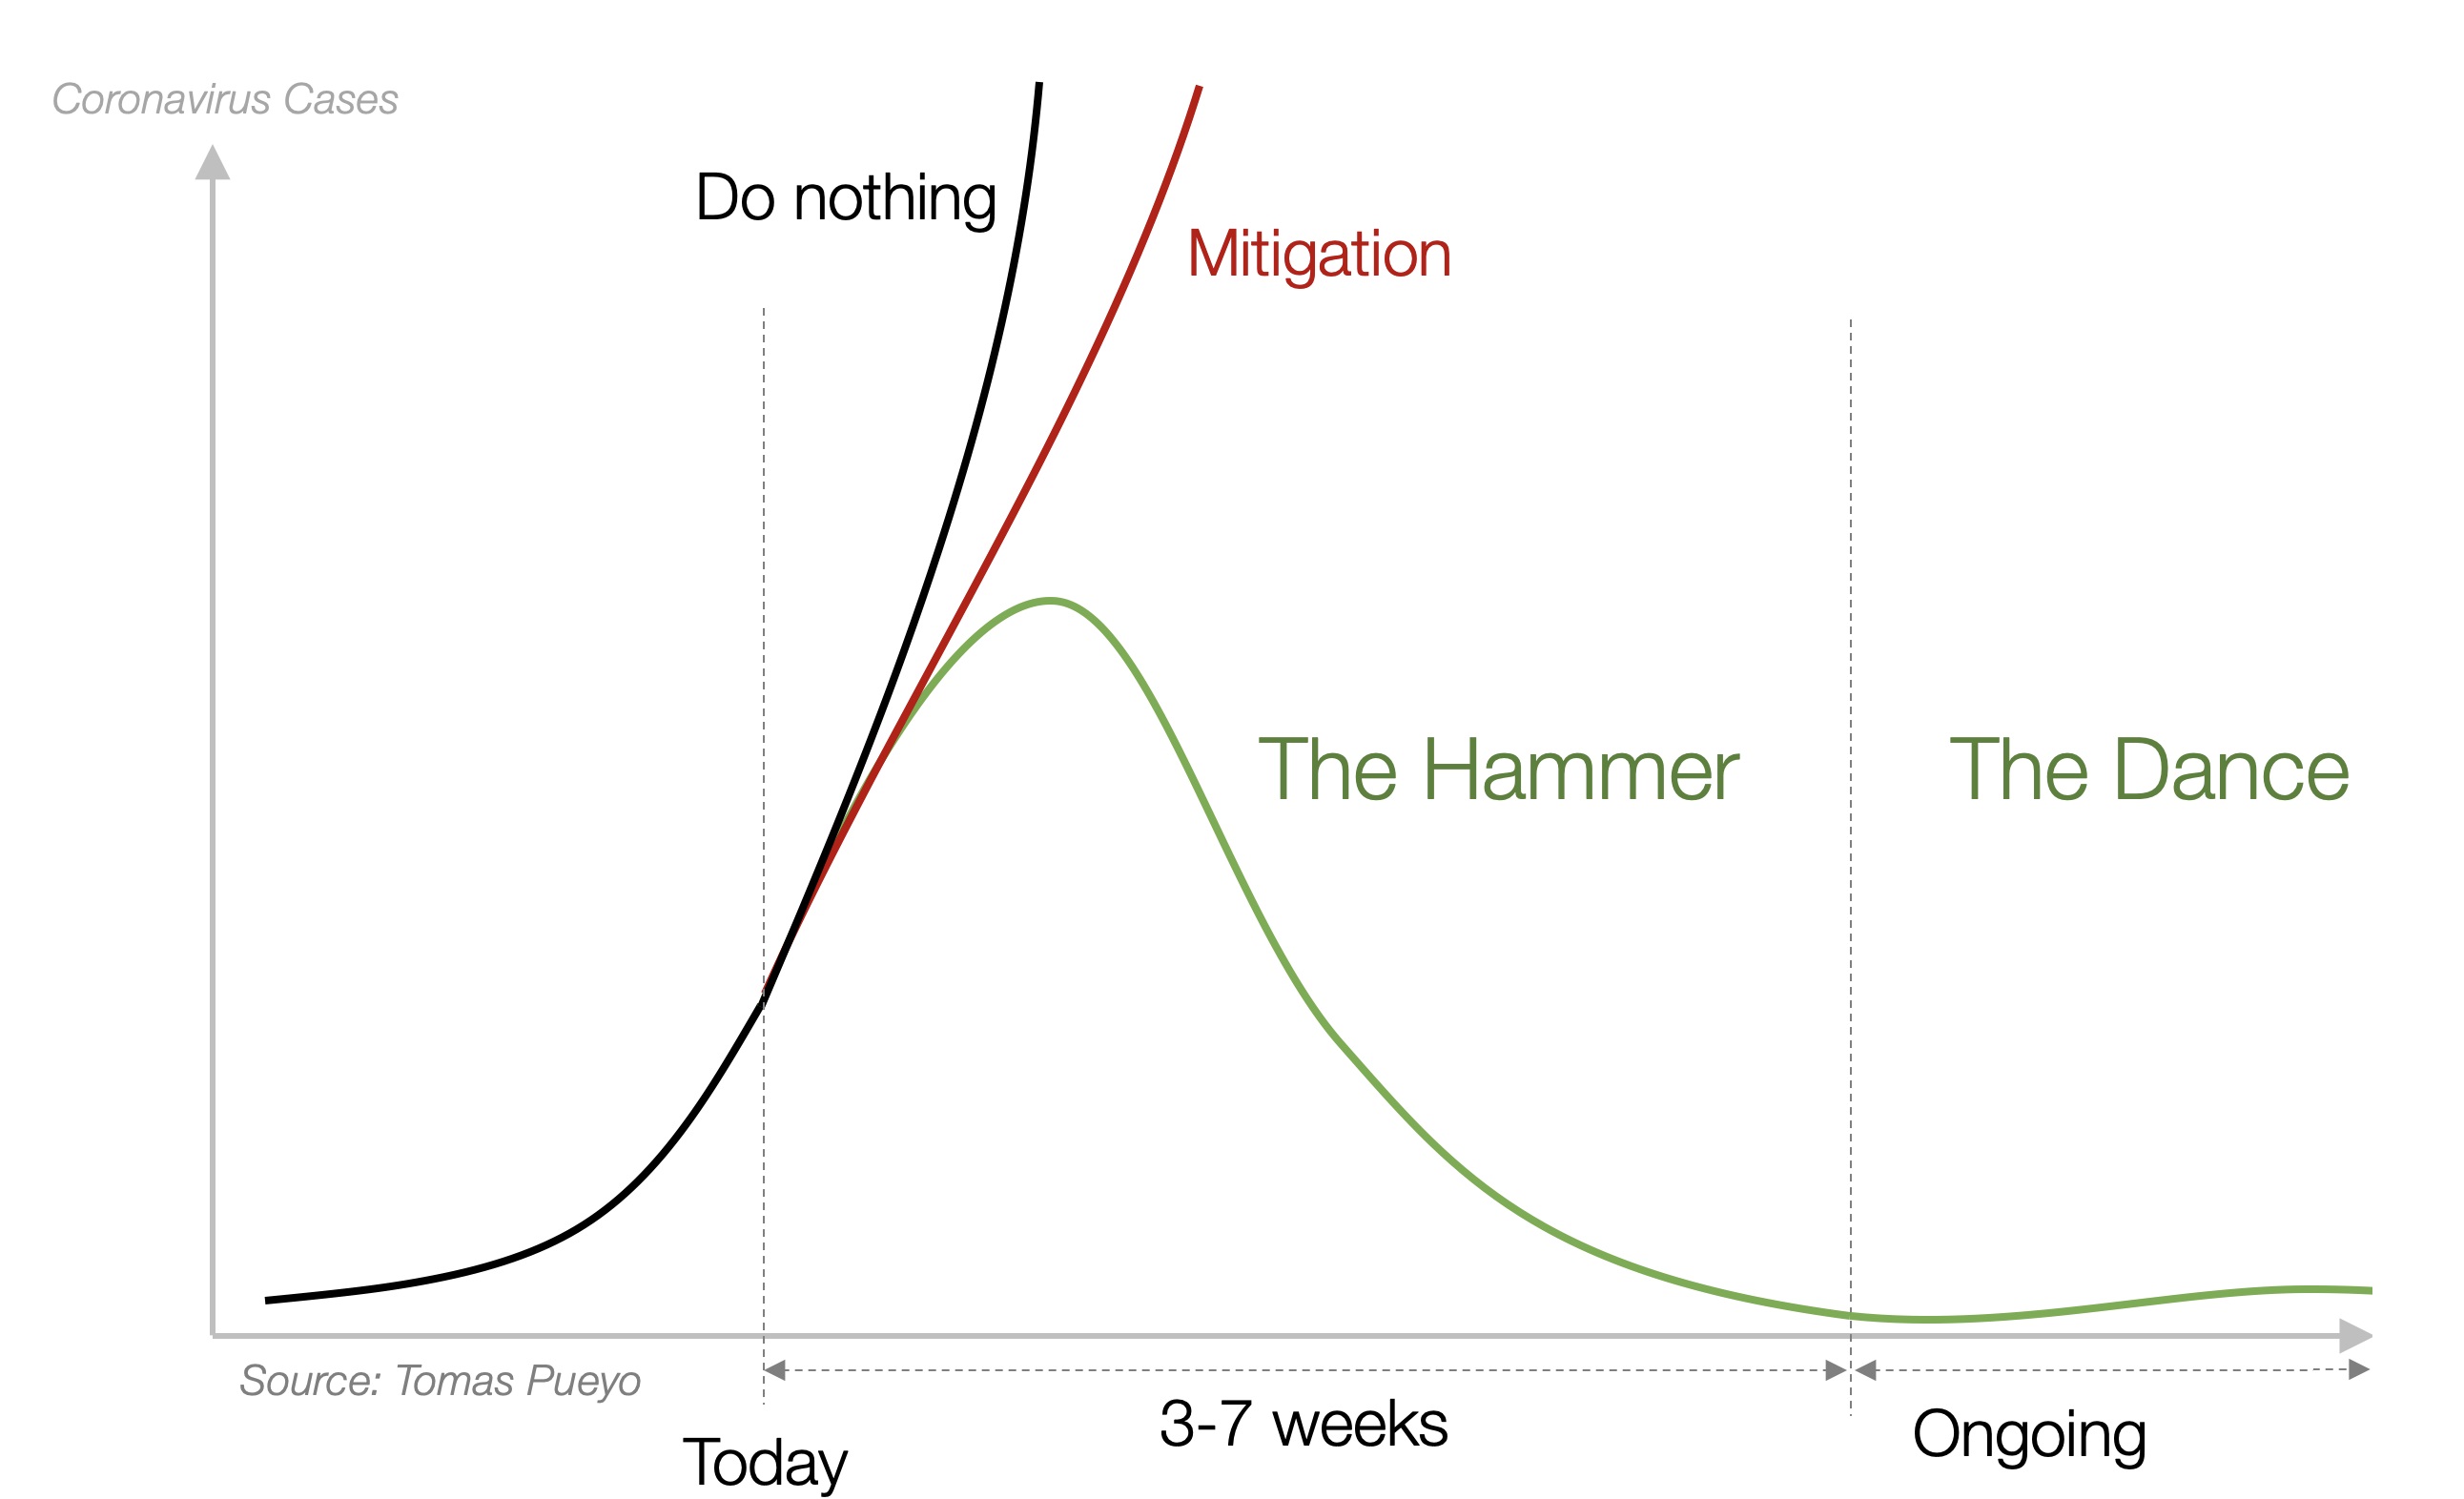 The Hammer and the Dance graph